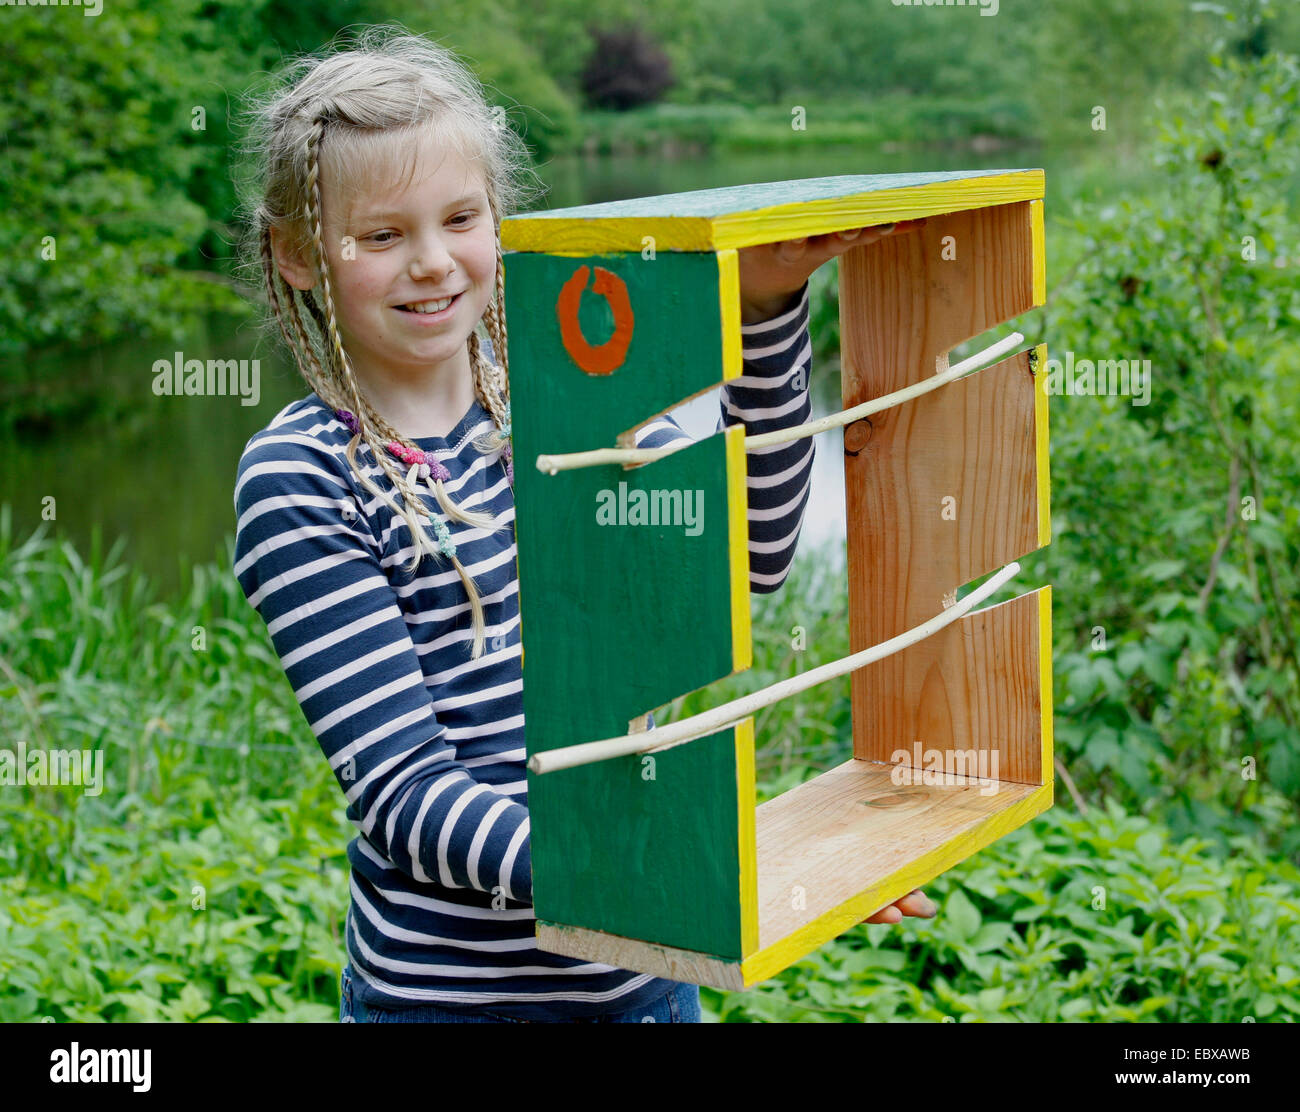 children are making an apple dehydrator; girl with a finished and colourful painted apple dehydrator, Germany Stock Photo